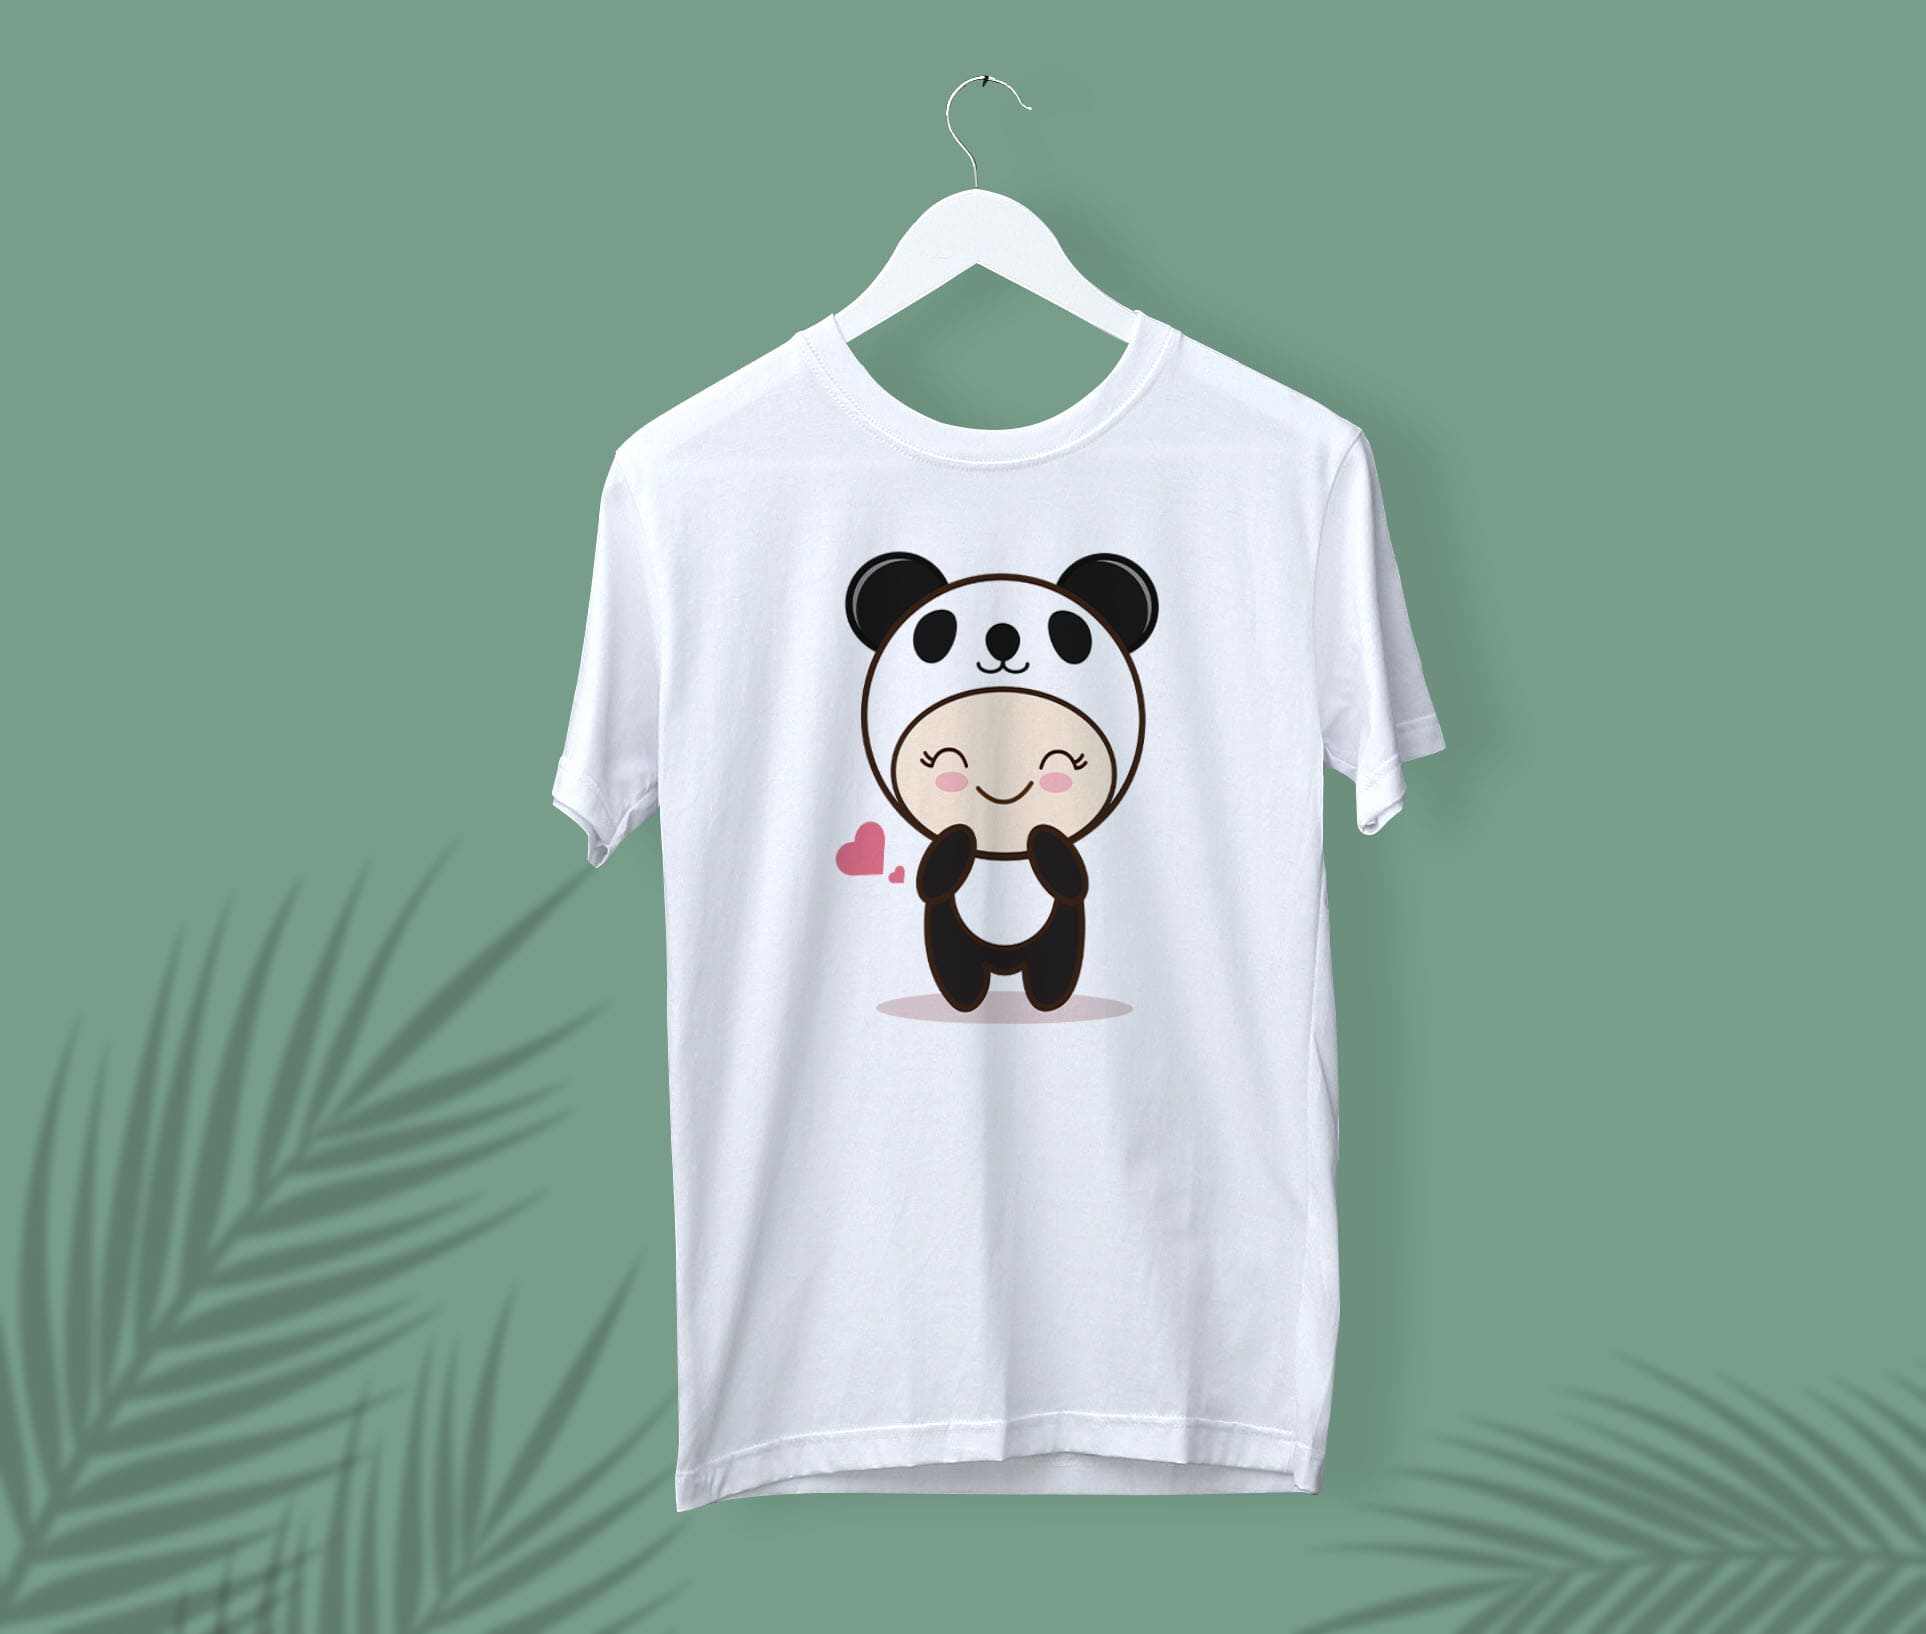 White t-shirt with a cute girl panda and pink heart on a white hanger on a turquoise background.